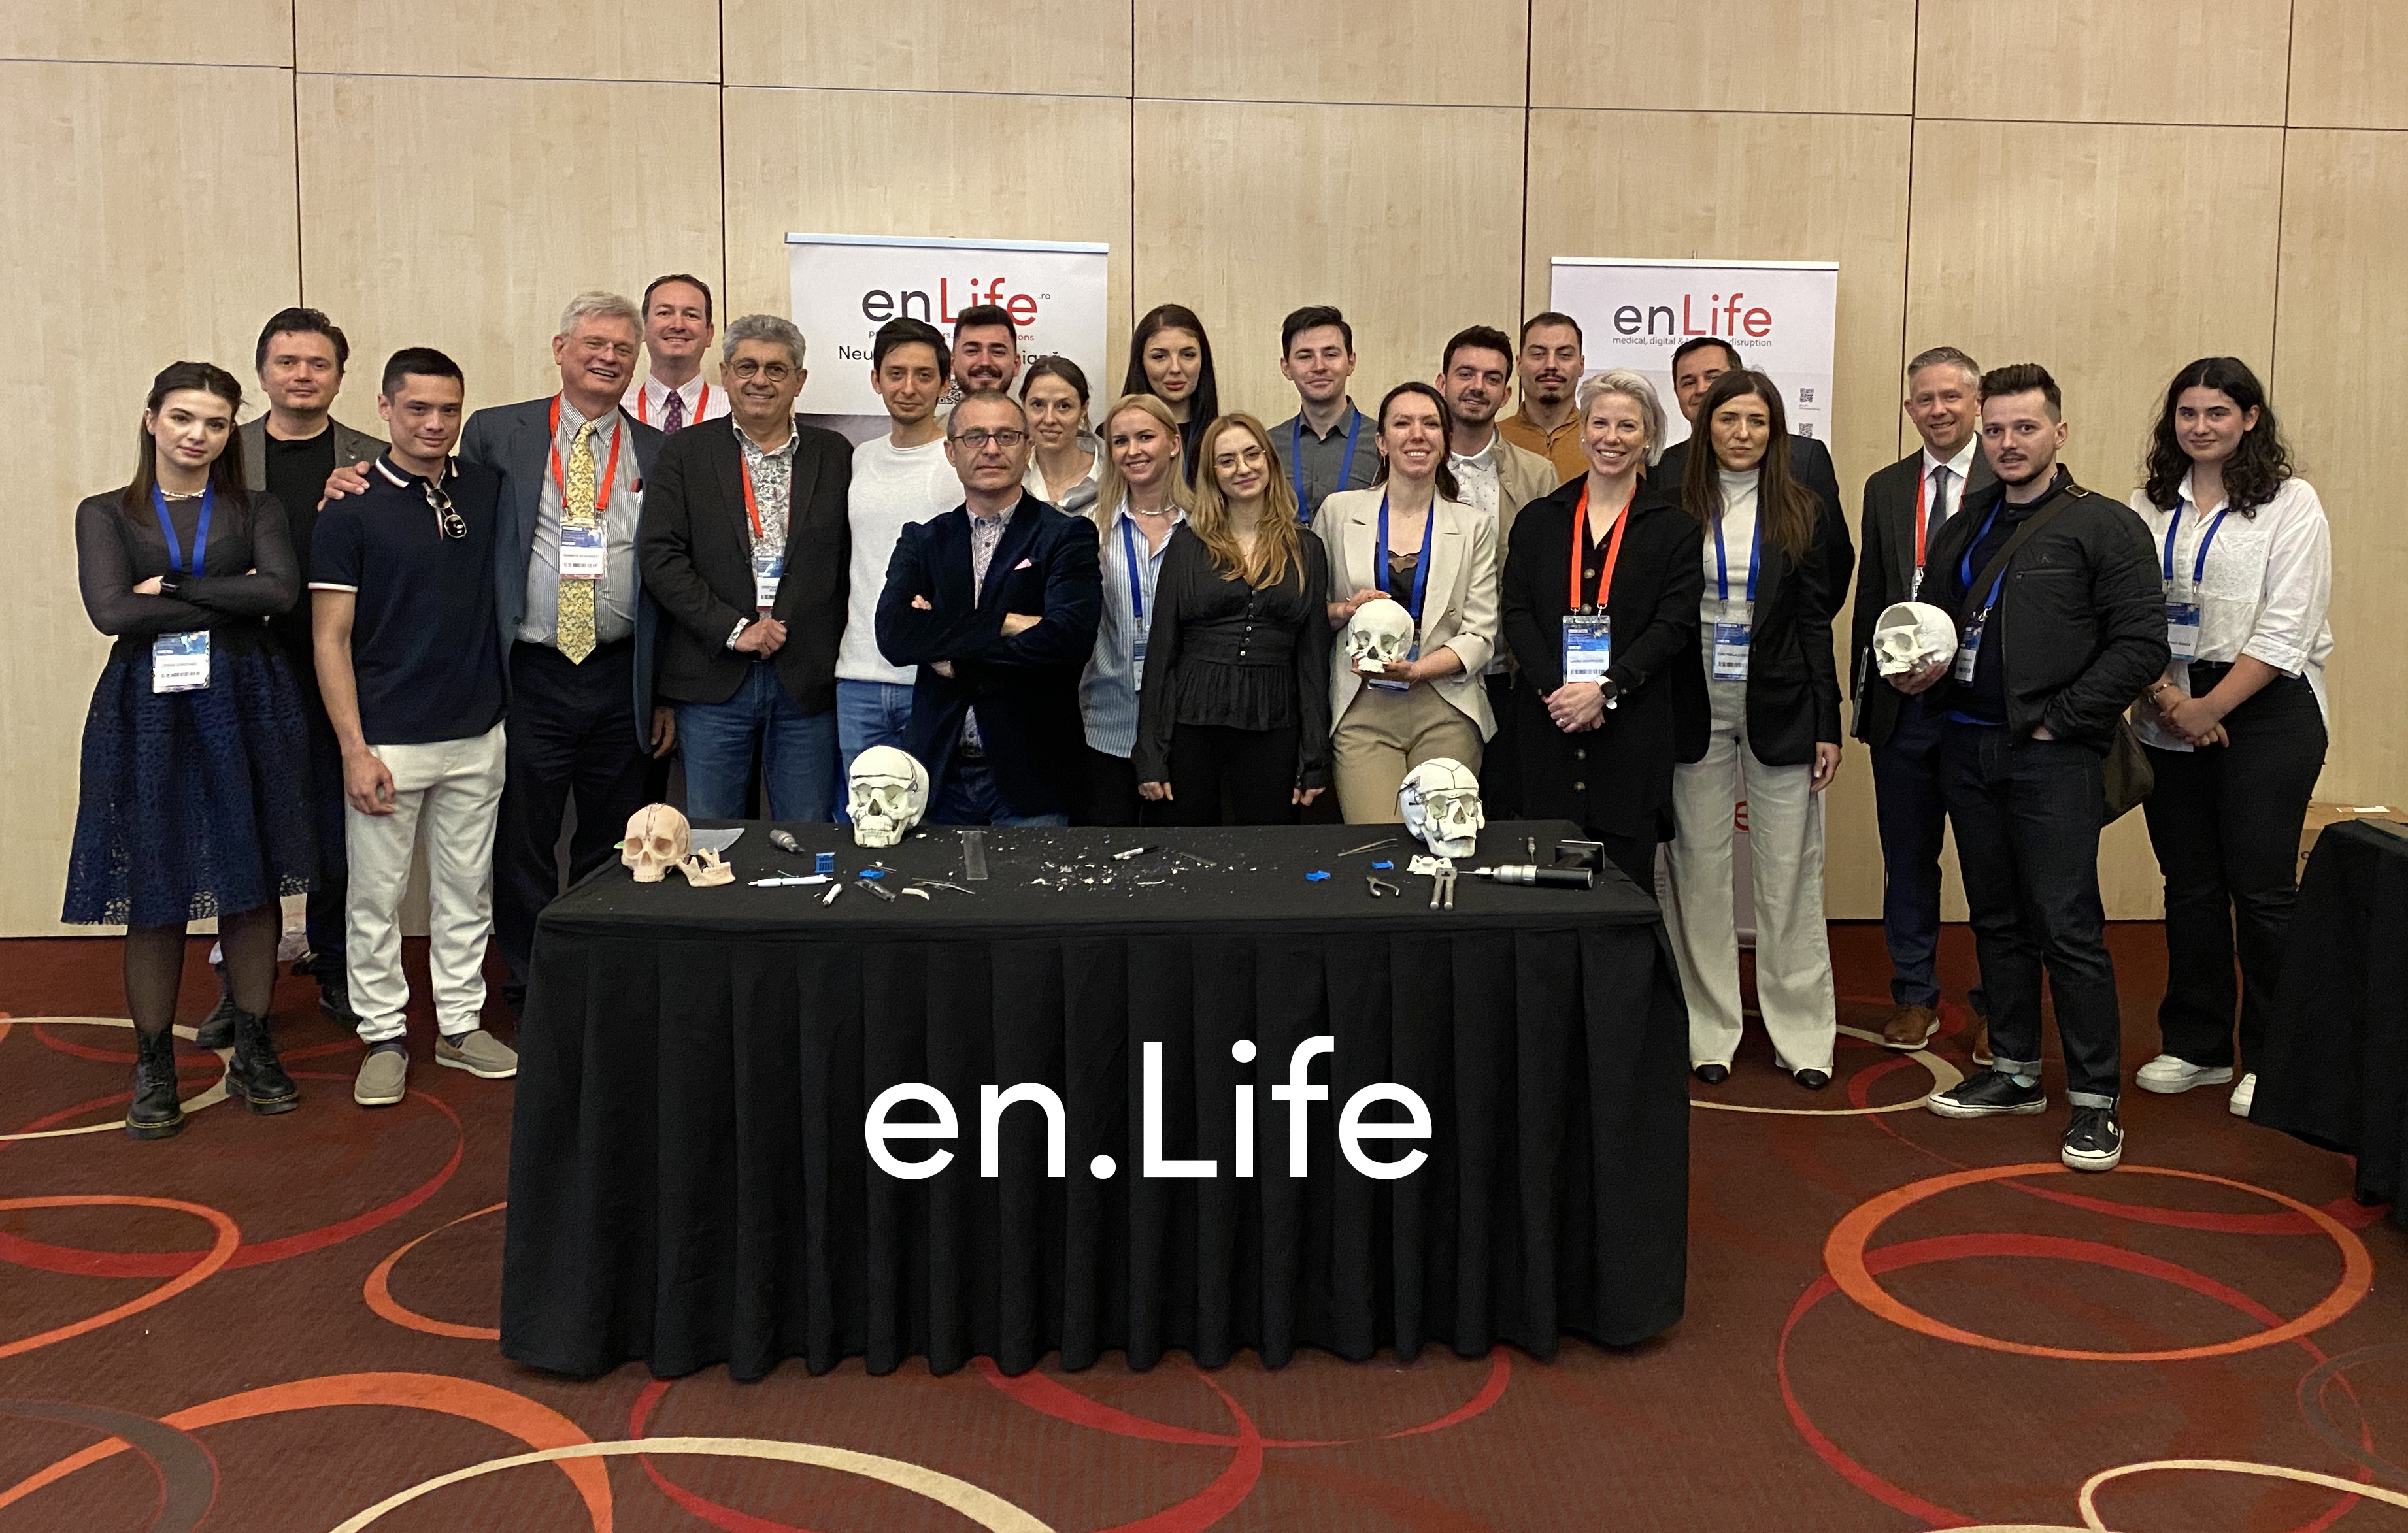 The workshop of American Society of Maxillofacial Surgeons (ASMS)BASIC CRANIOMAXILLOFACIAL PRINCIPLES & TECHNIQUES, with support of En.Life